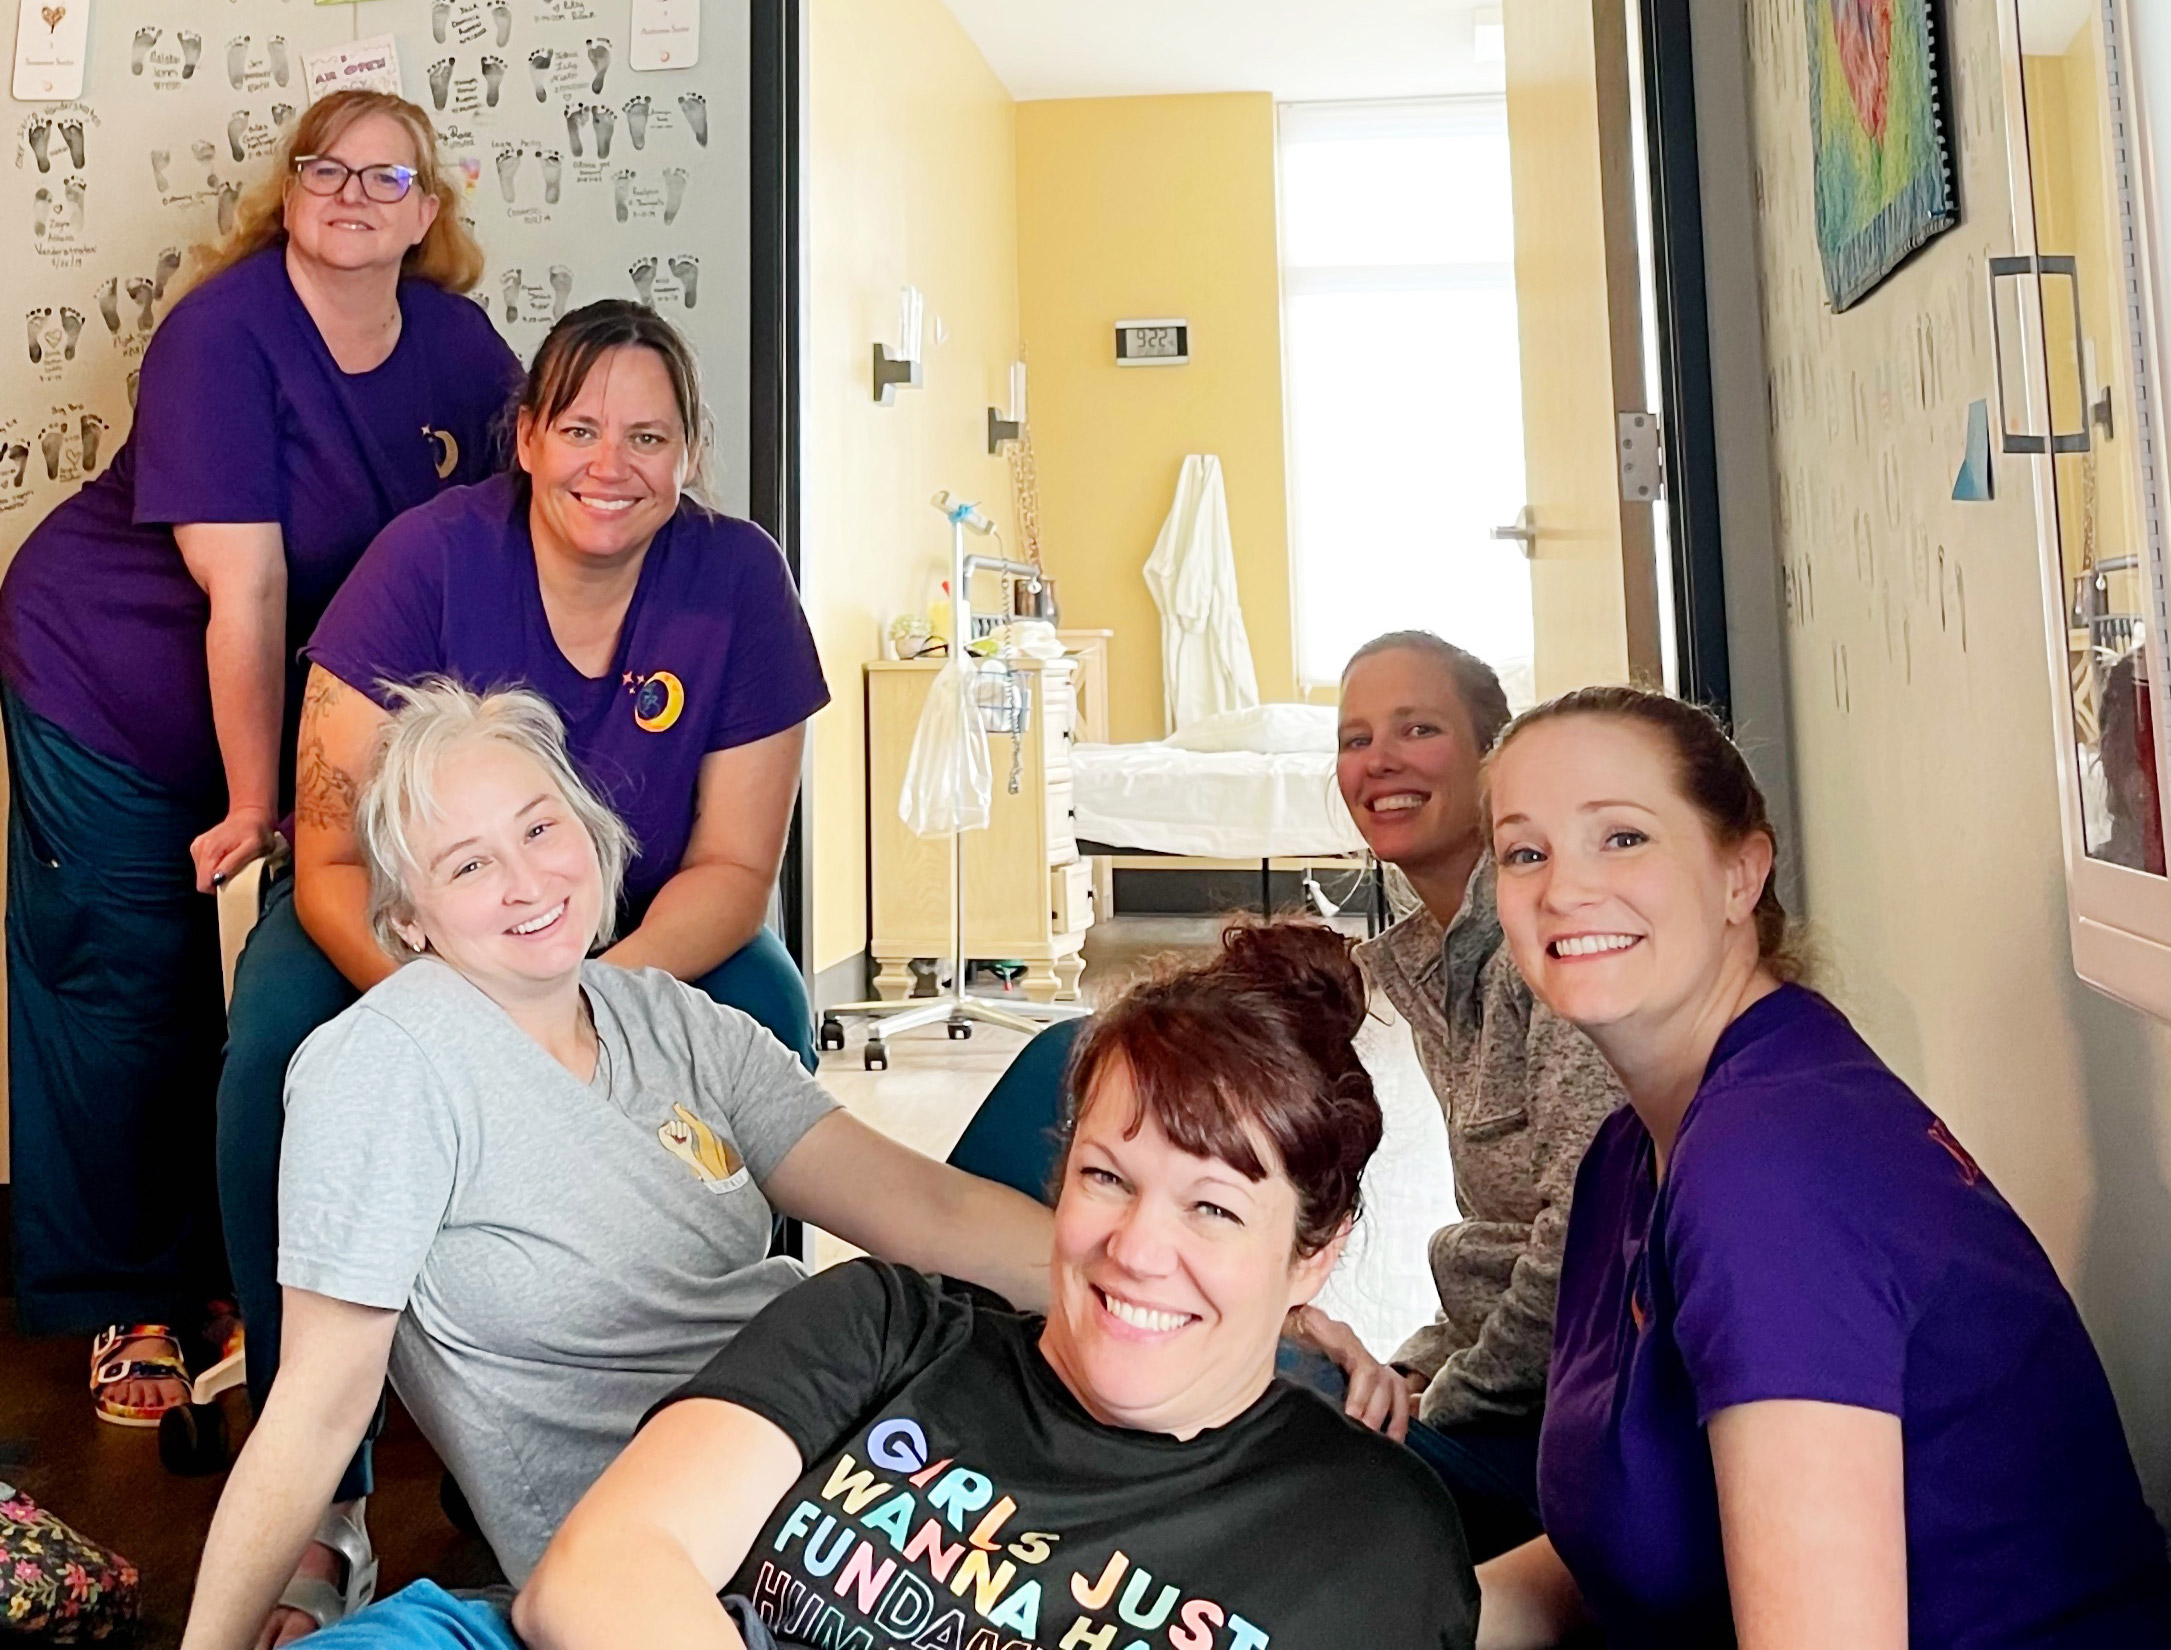 A photo shows workers at Seasons Community Birth Center.